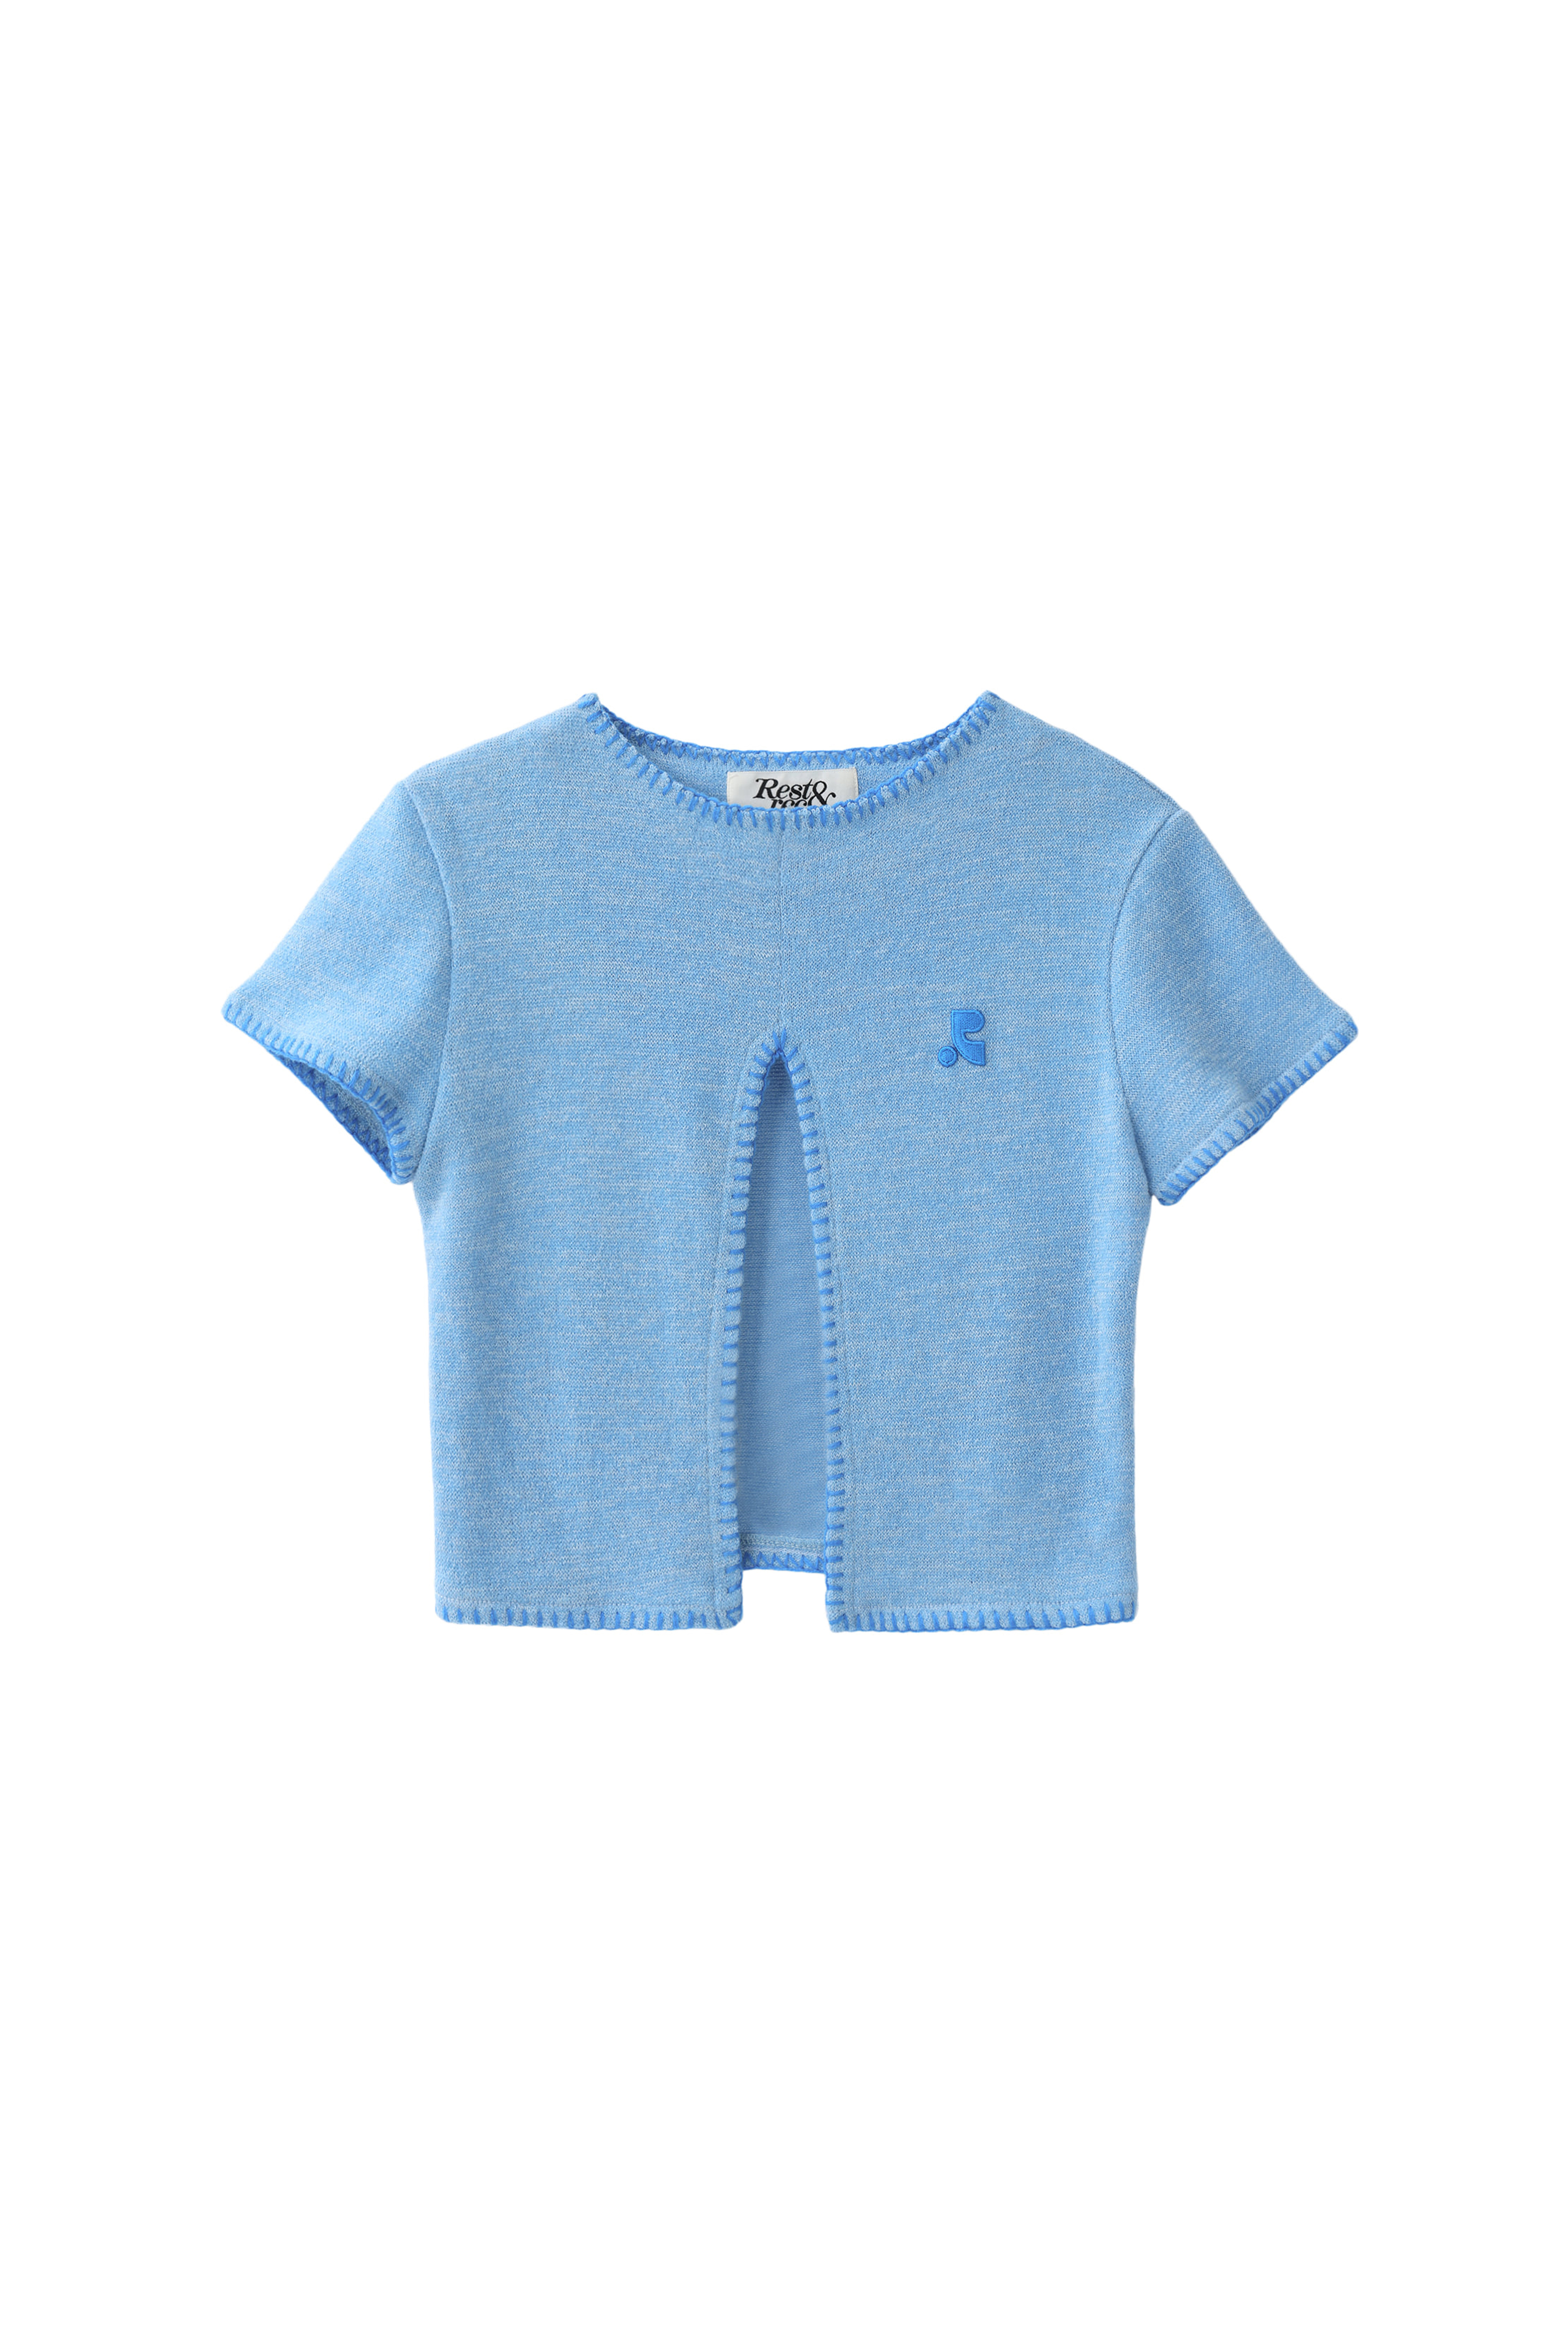 RR CUT OUT KNIT TOP - SKYBLUE